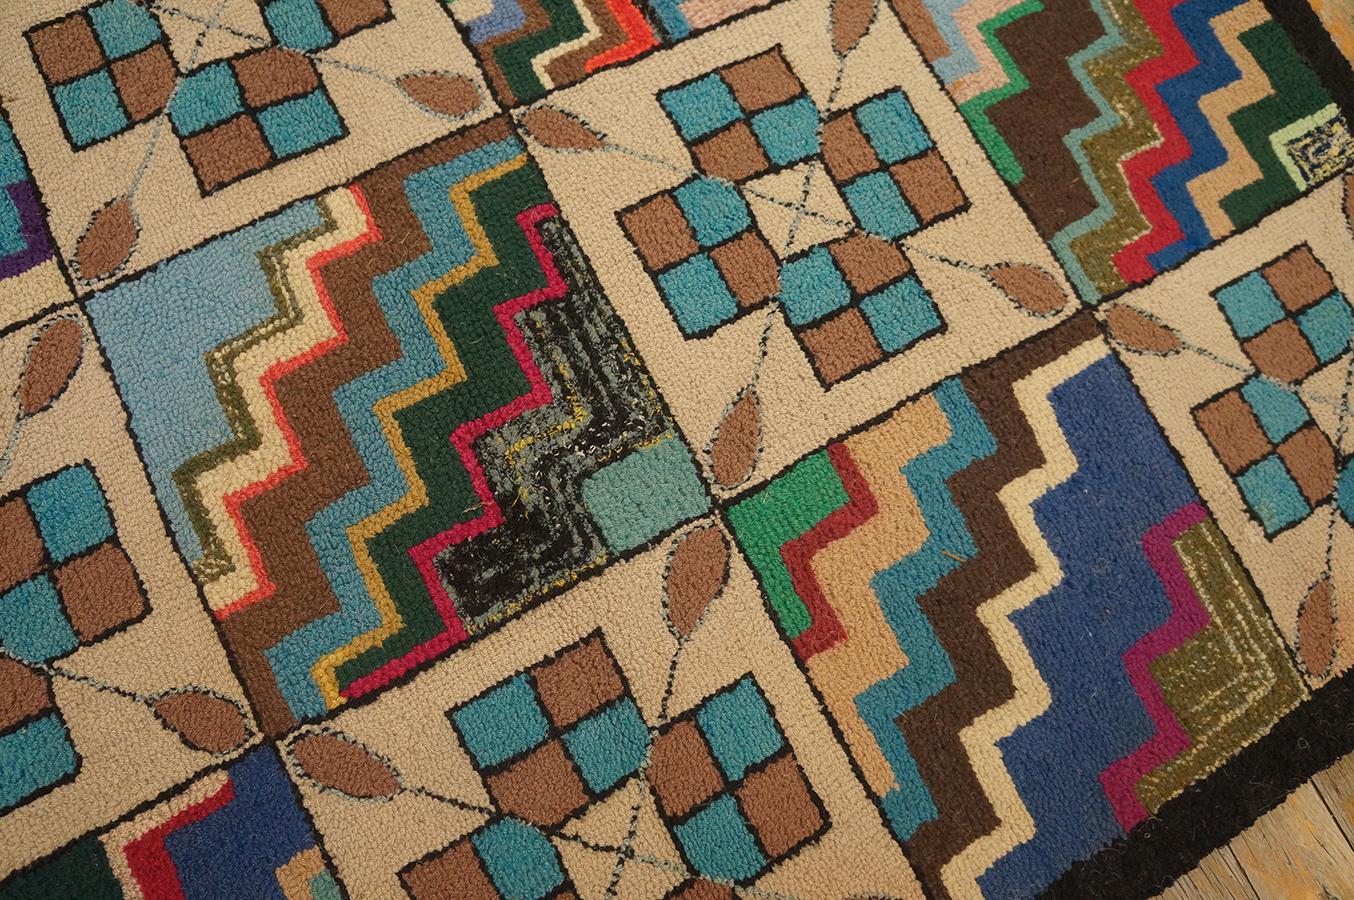  Antique American Hooked Rug 2'3